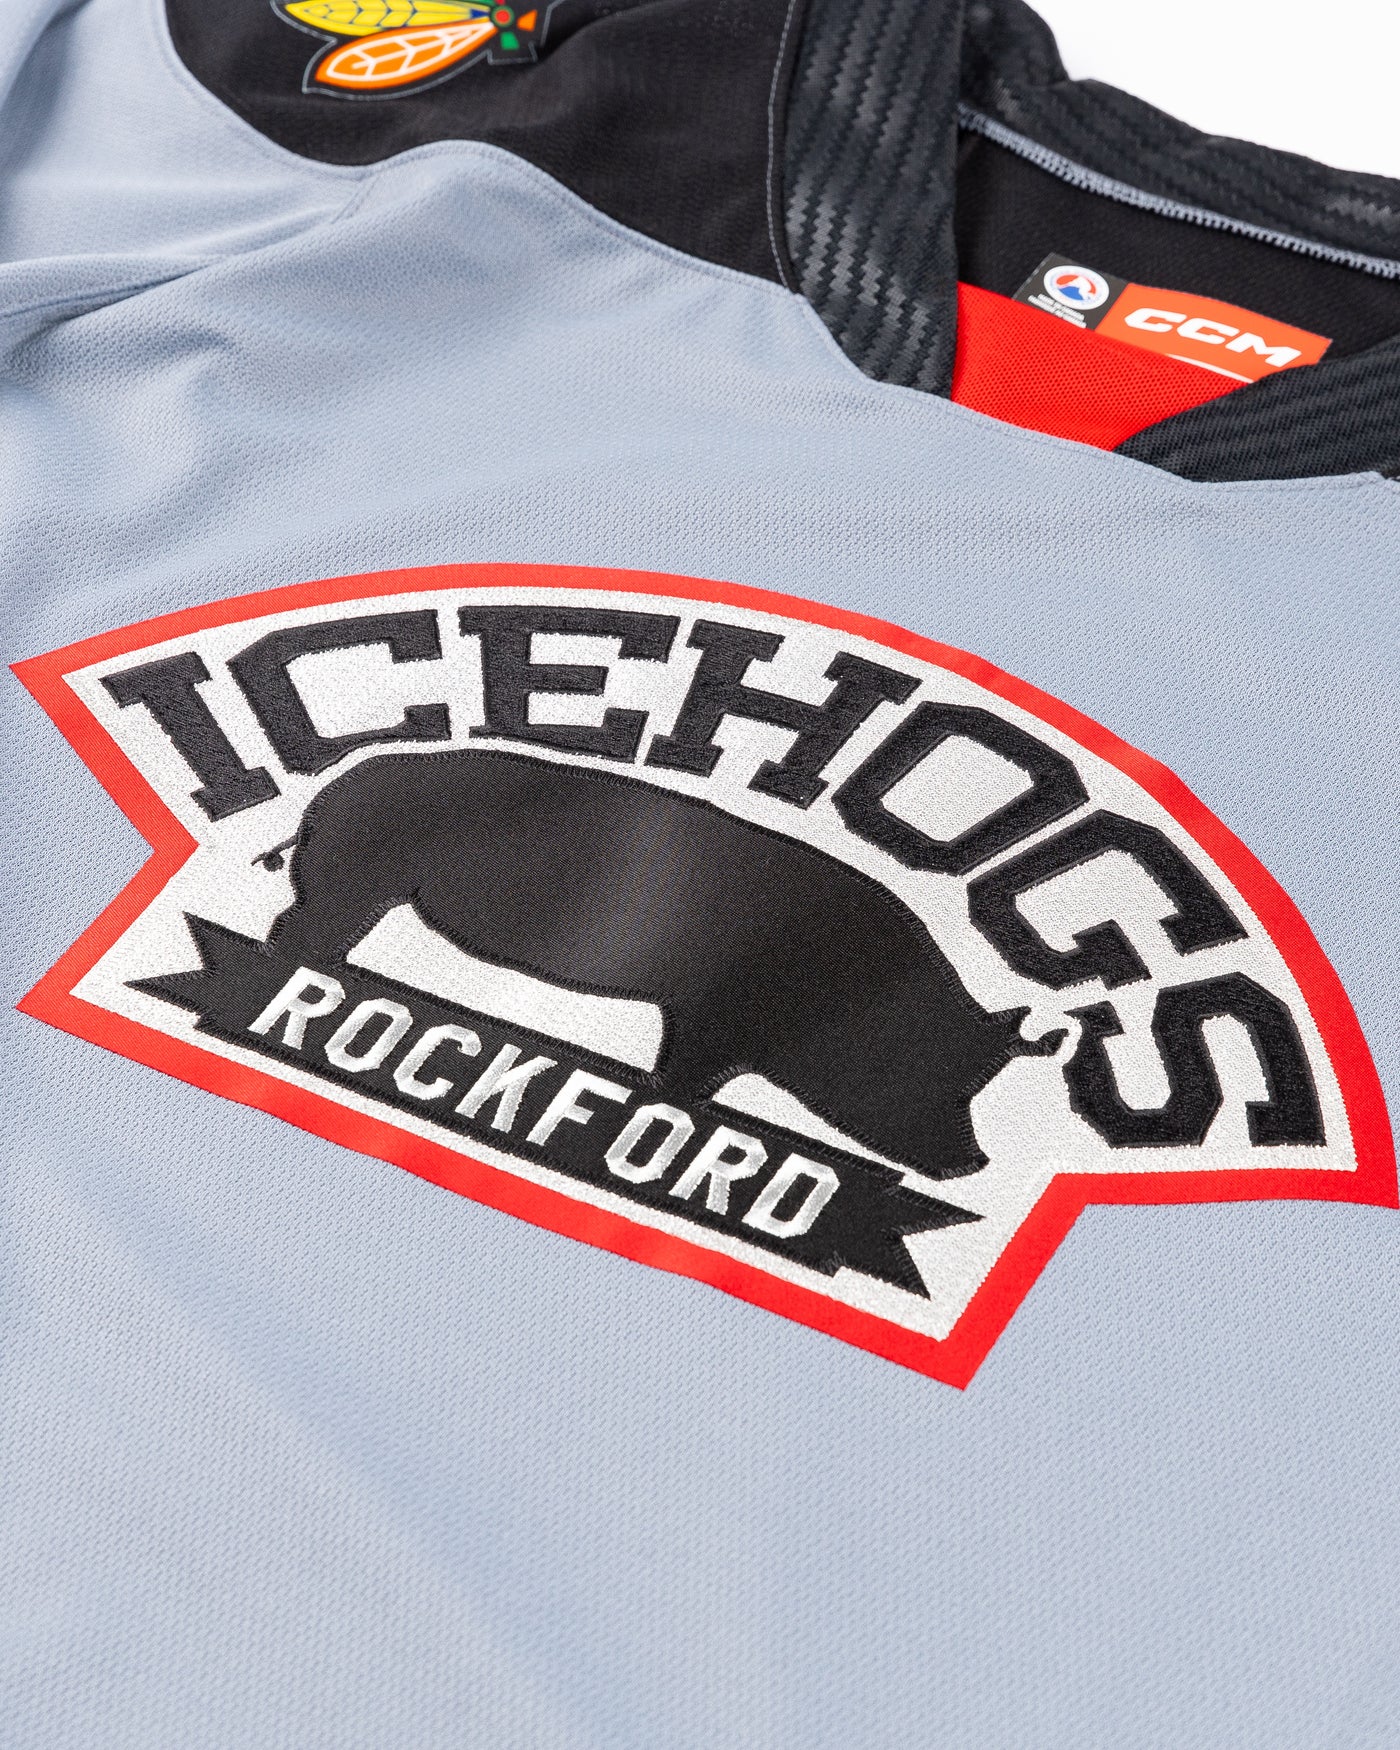 gray CCM Rockford IceHogs jersey - detail lay flat